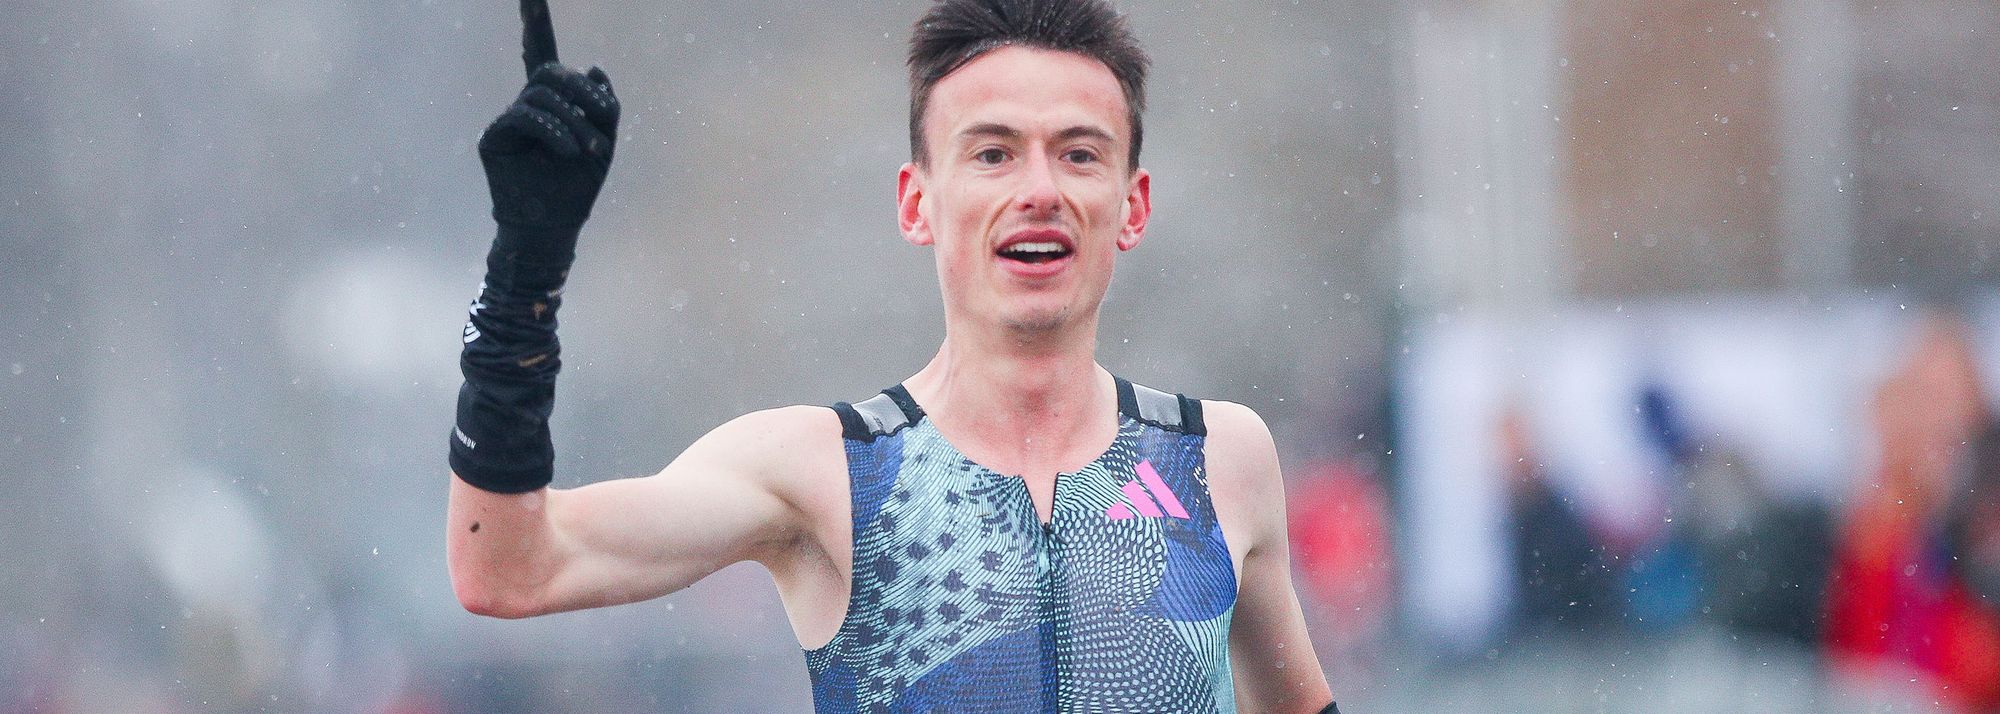 Yann Schrub strode to his first World Athletics Cross Country Tour Gold triumph, while Rahel Daniel recovered from a fall to continue her winning ways